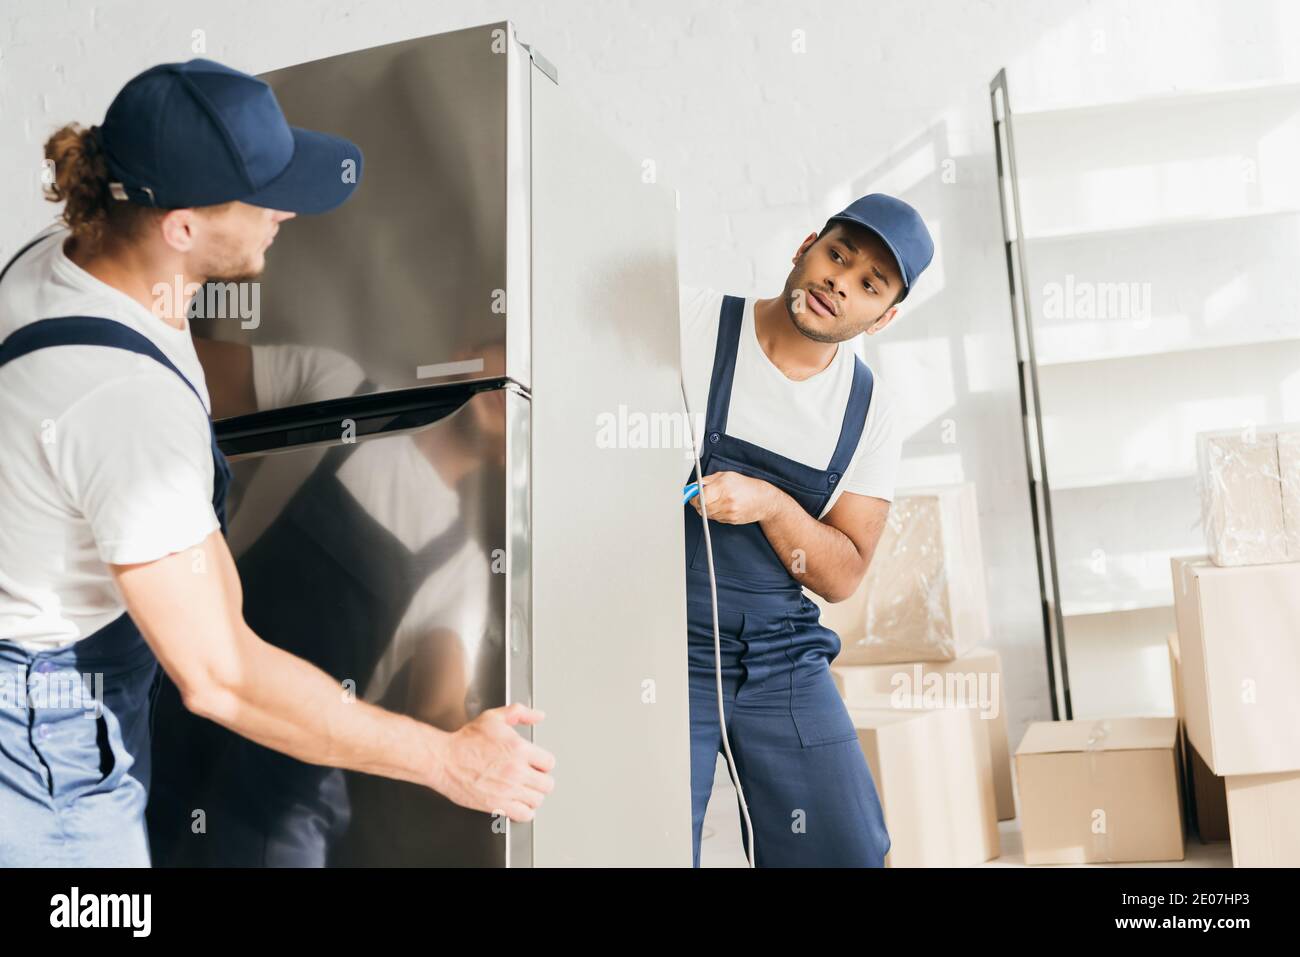 Indian mover looking at coworker while moving fridge in apartment Stock Photo